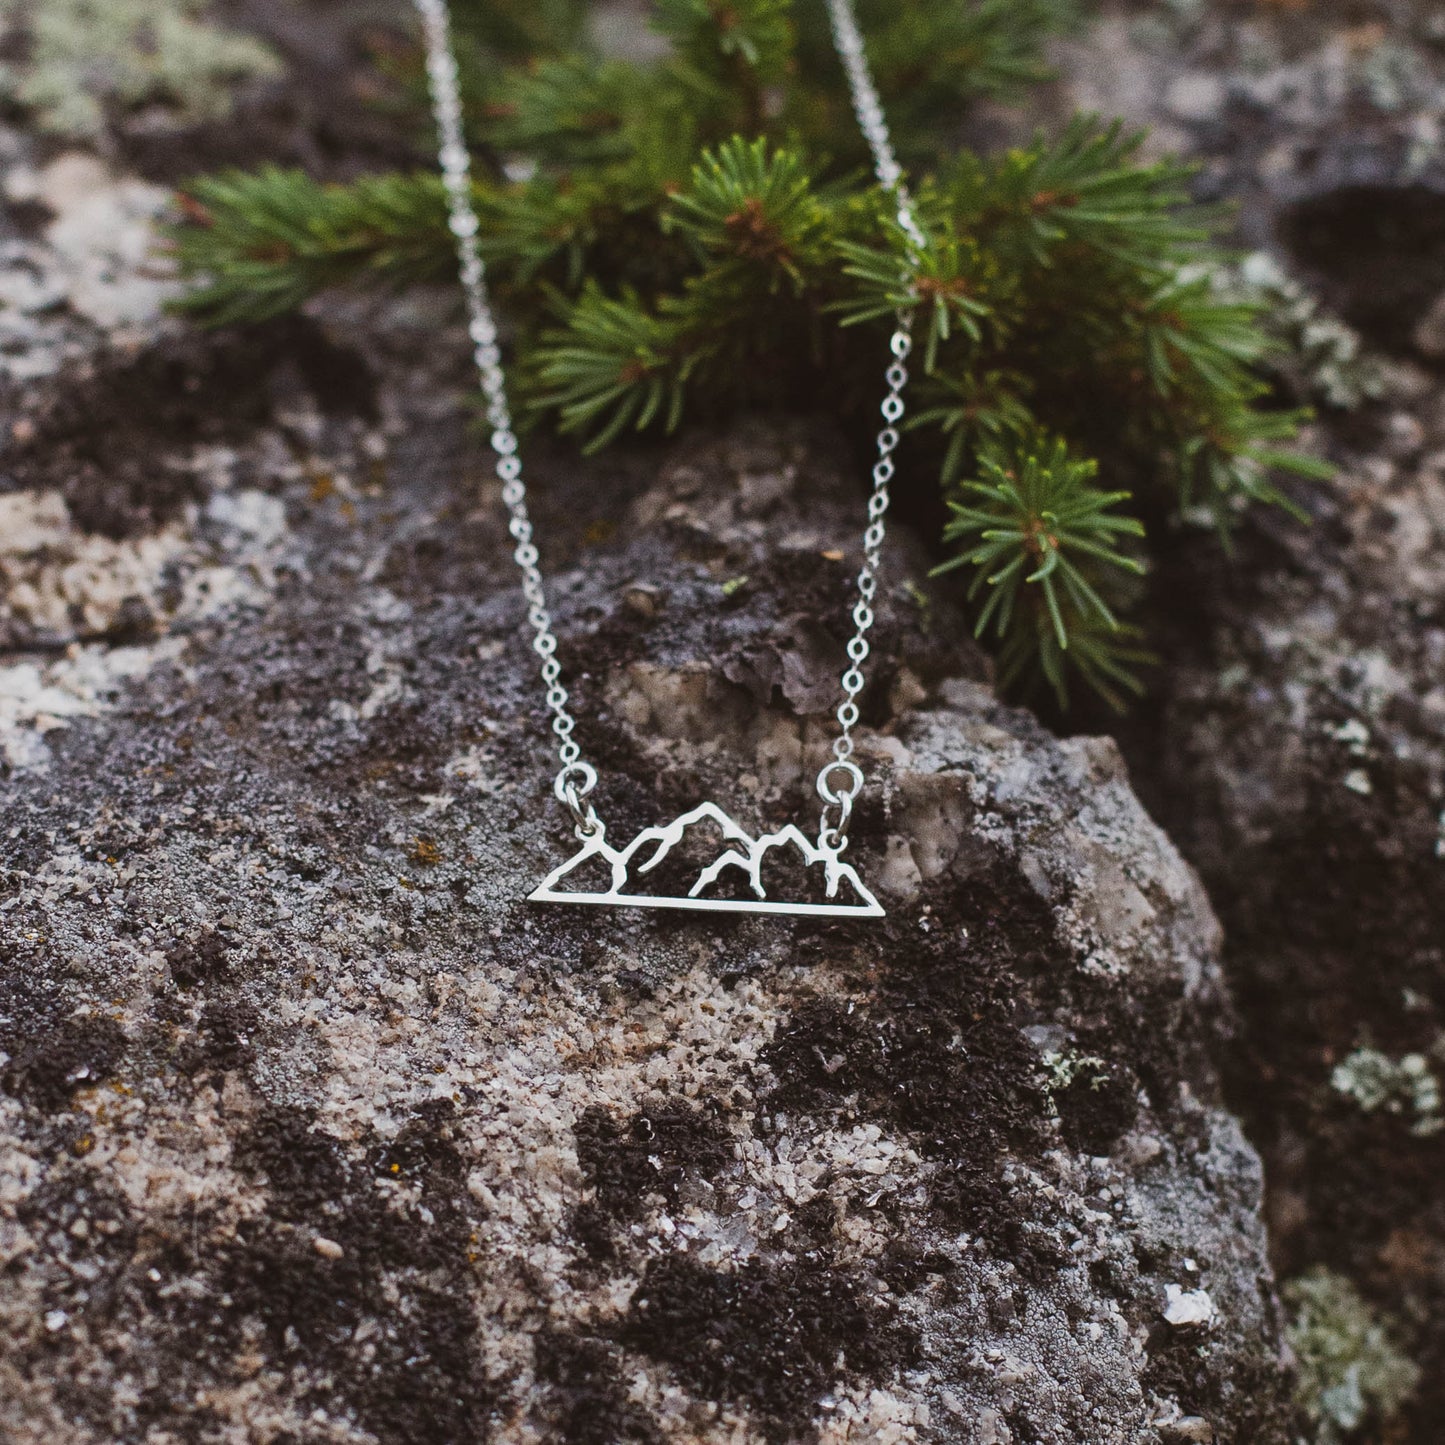 Mountain Necklace Sterling Silver or Gold, Horizontal Bar Necklace, Mountain Range Jewelry, Adventure Jewelry, Mountain Jewelry, Golden